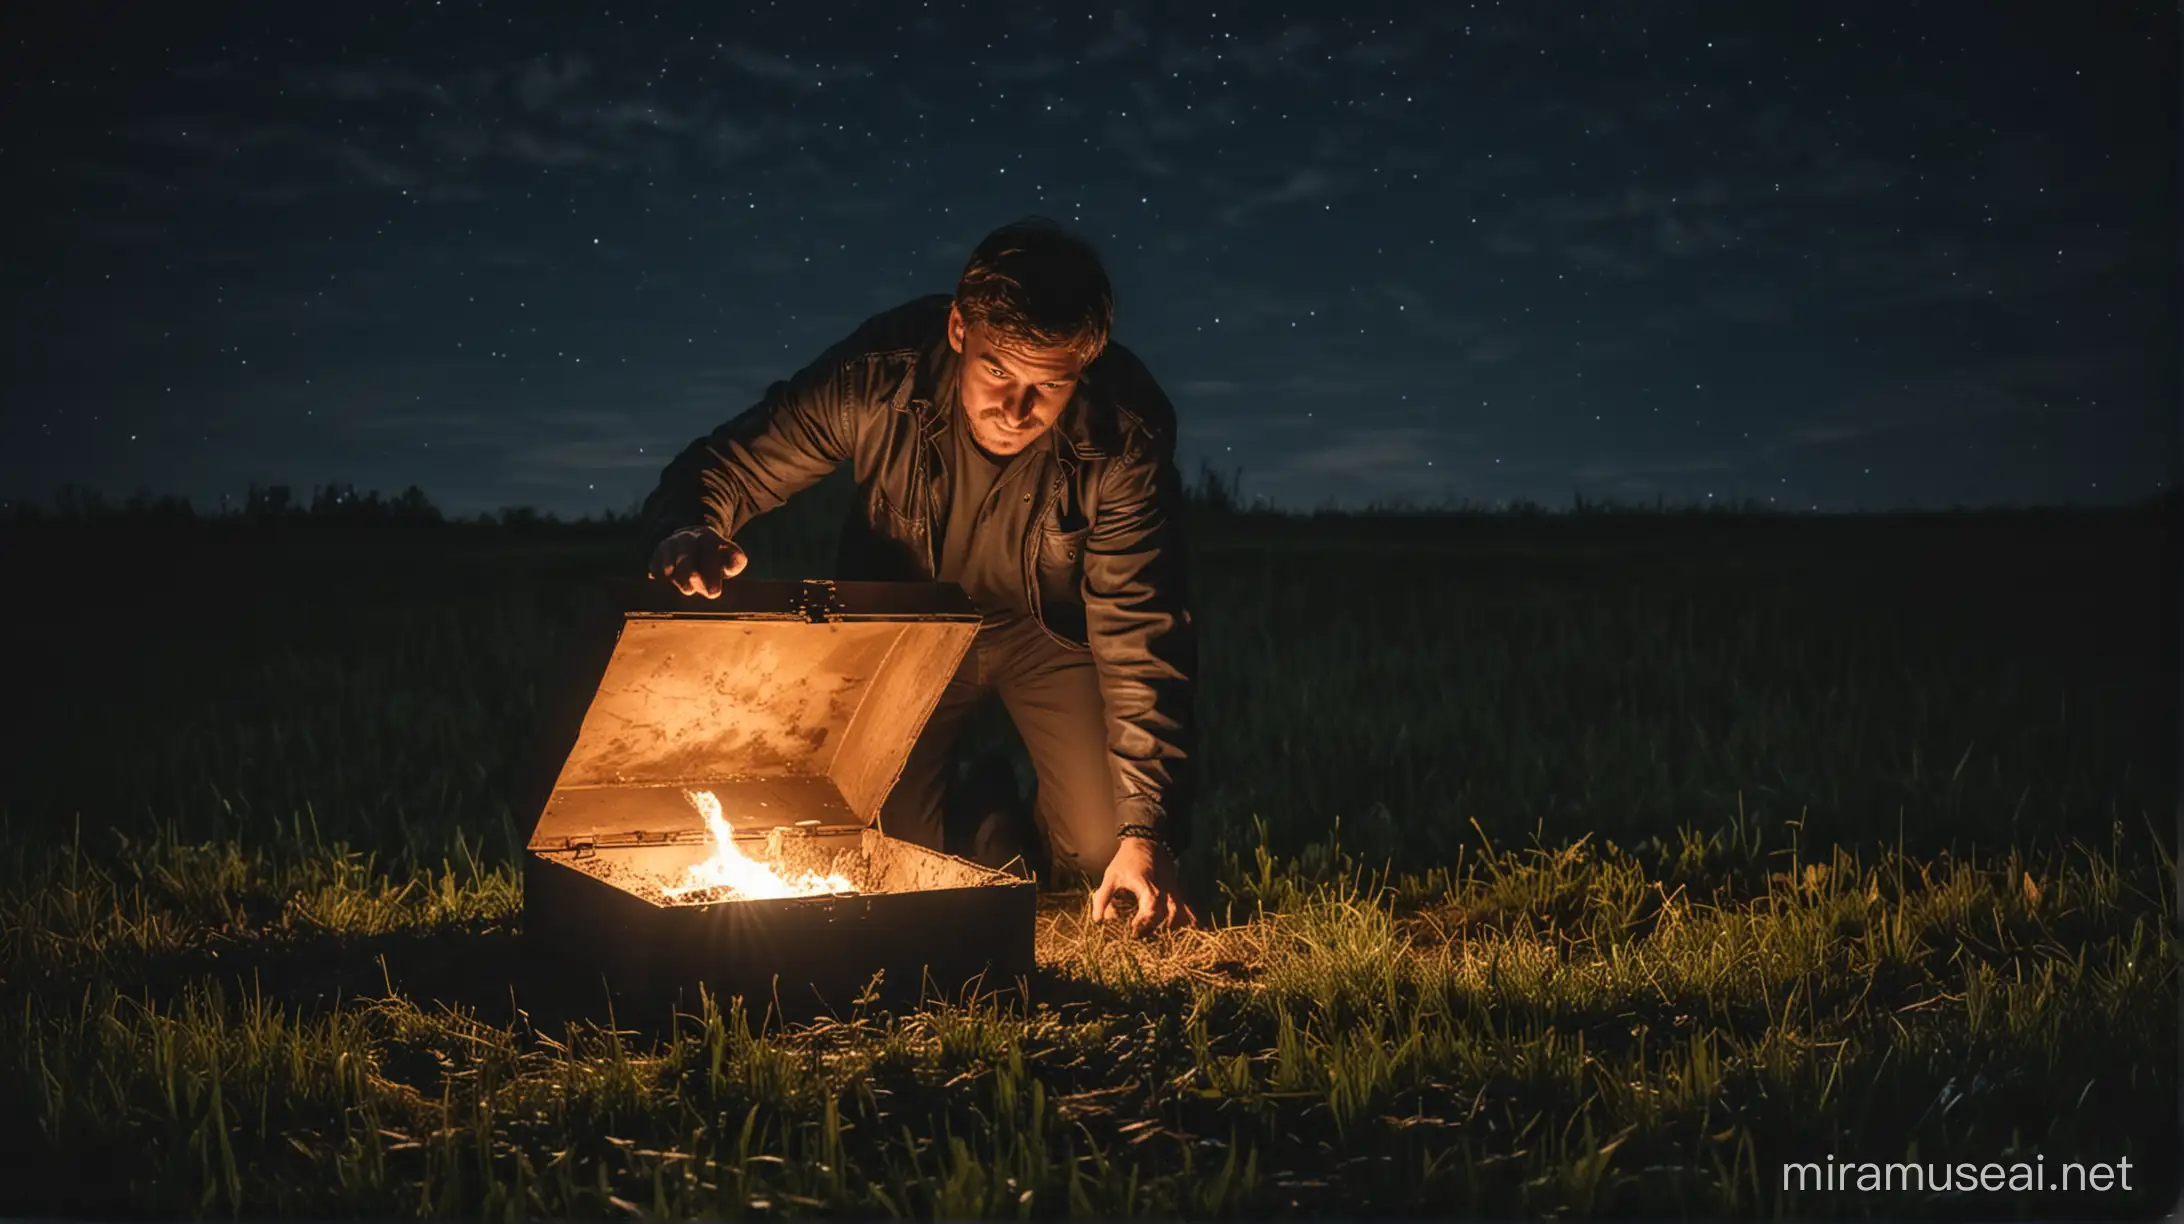 Man Discovering Glowing Chest in Field at Night